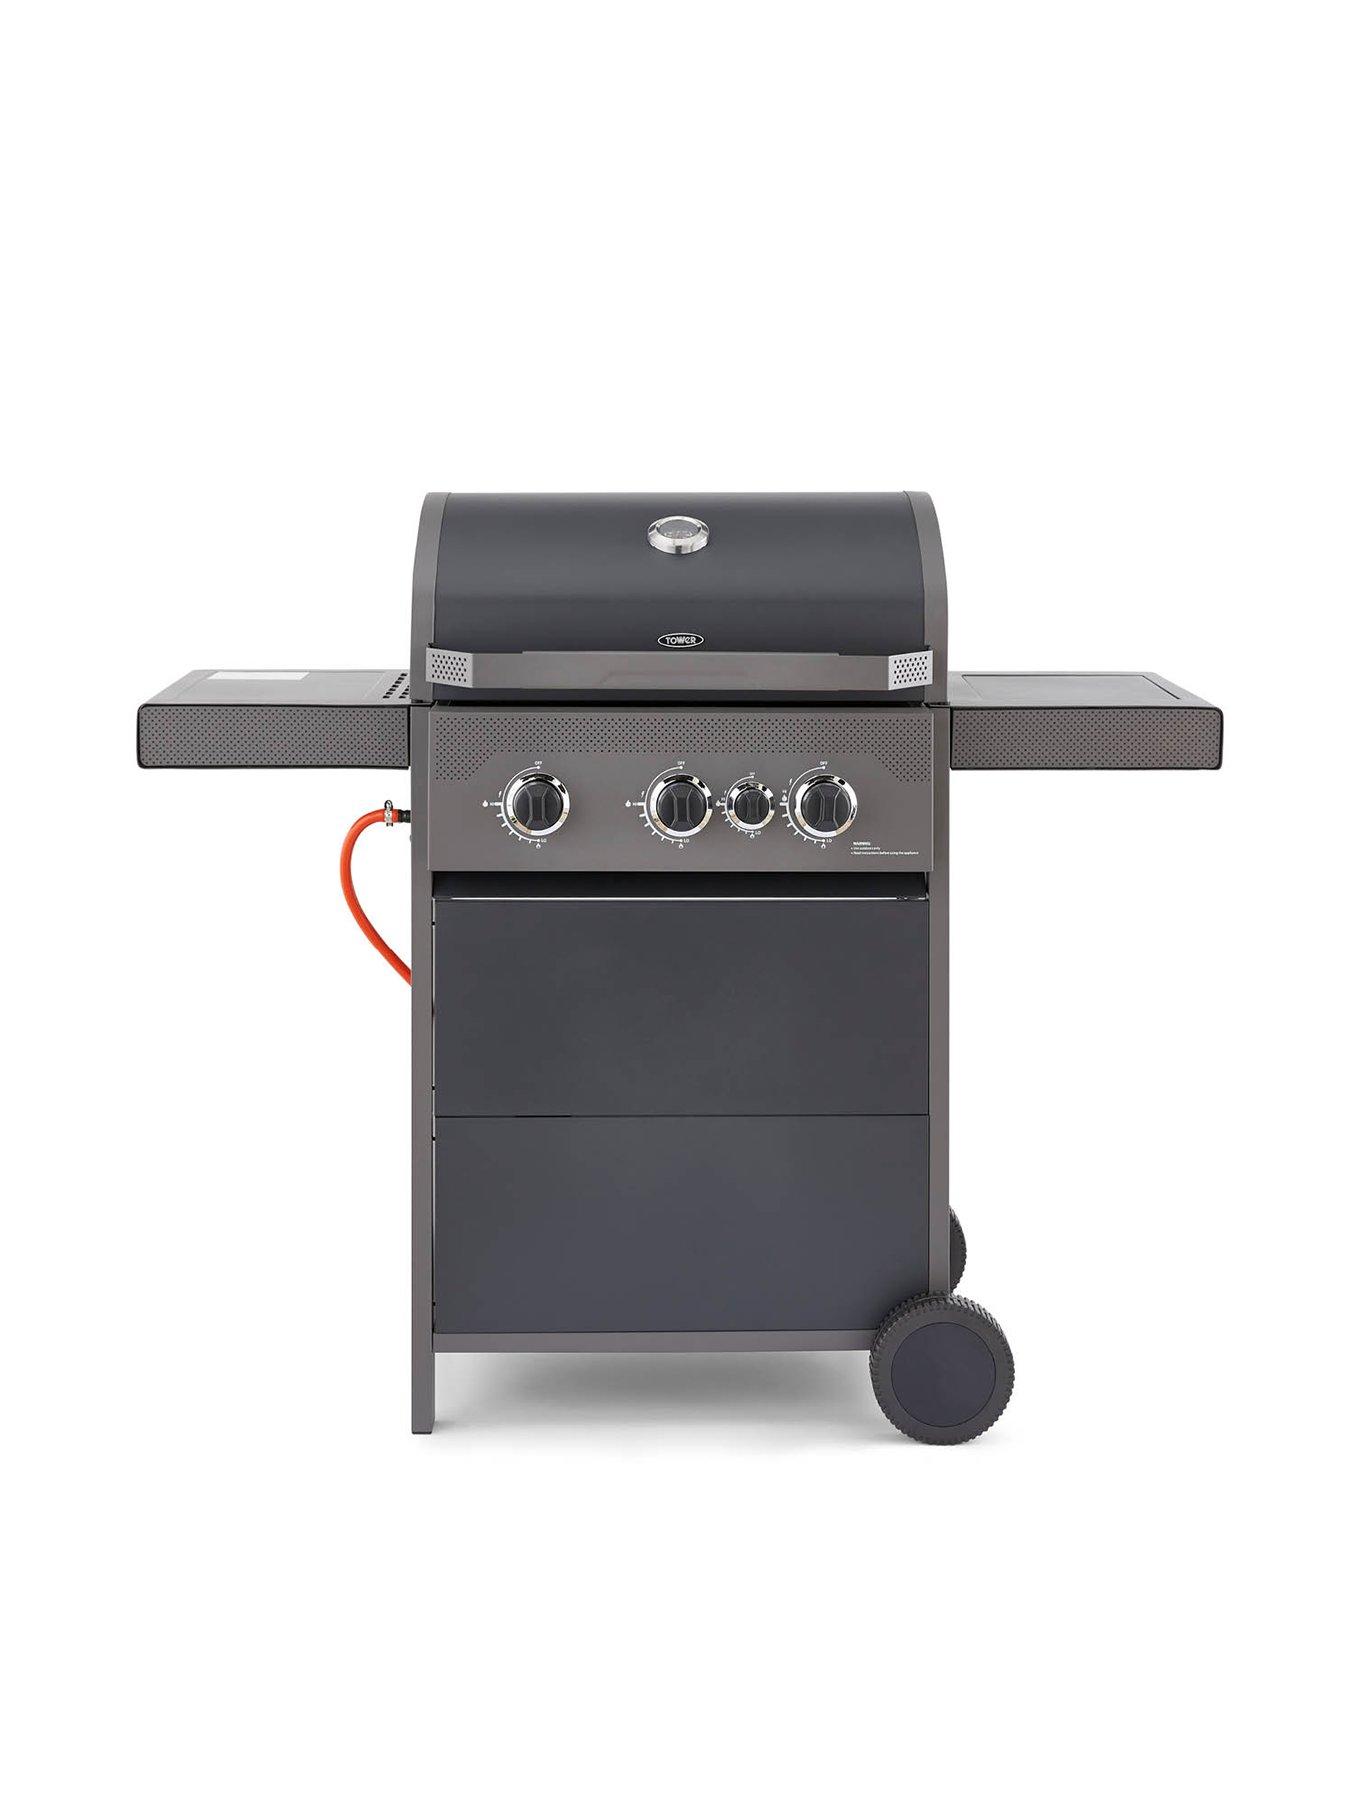 Tower Stealth 3000 Three Burner Porcelain Gas Bbq With Precision Thermometer And Rust Proof Design, Black, T978501